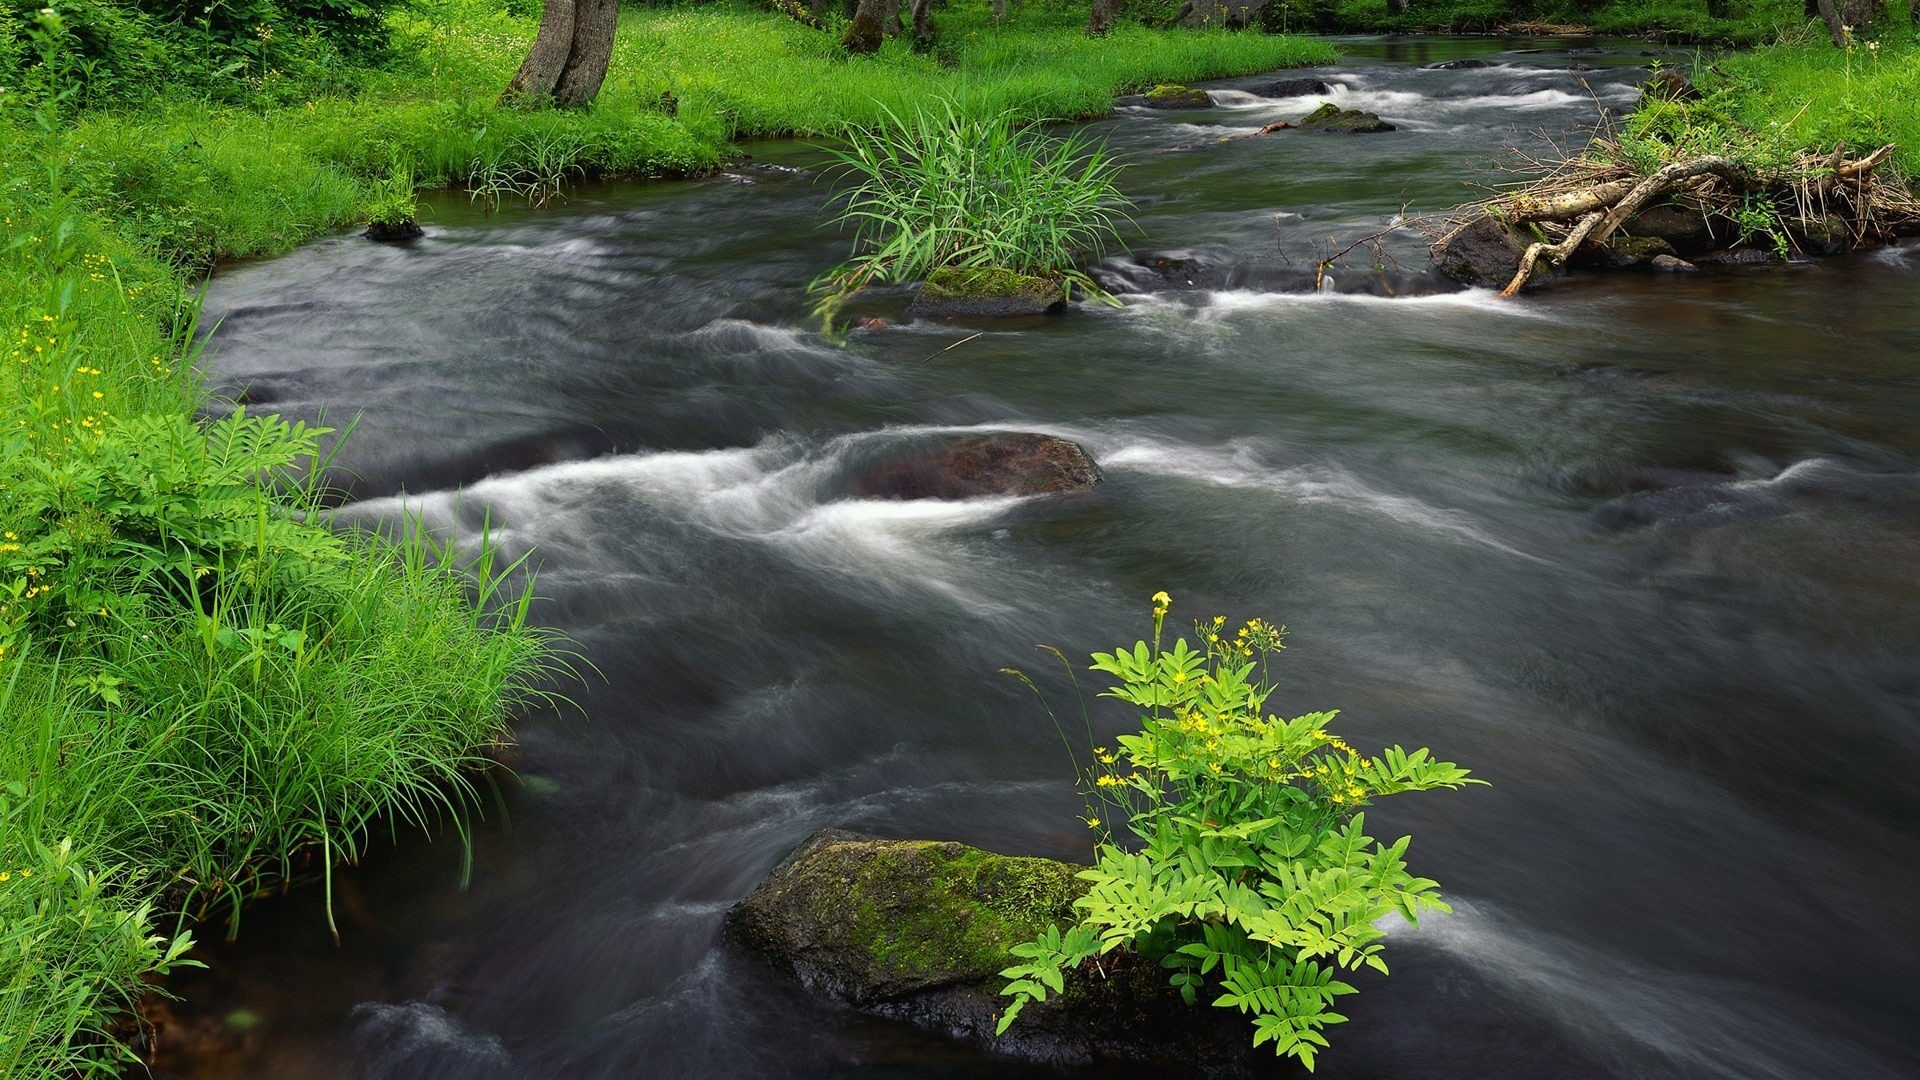 1920x1080 FOREST STREAM JAPAN Landscape Japanese Digital Scenery Photography HDR  Wallpaper - 1920x1440